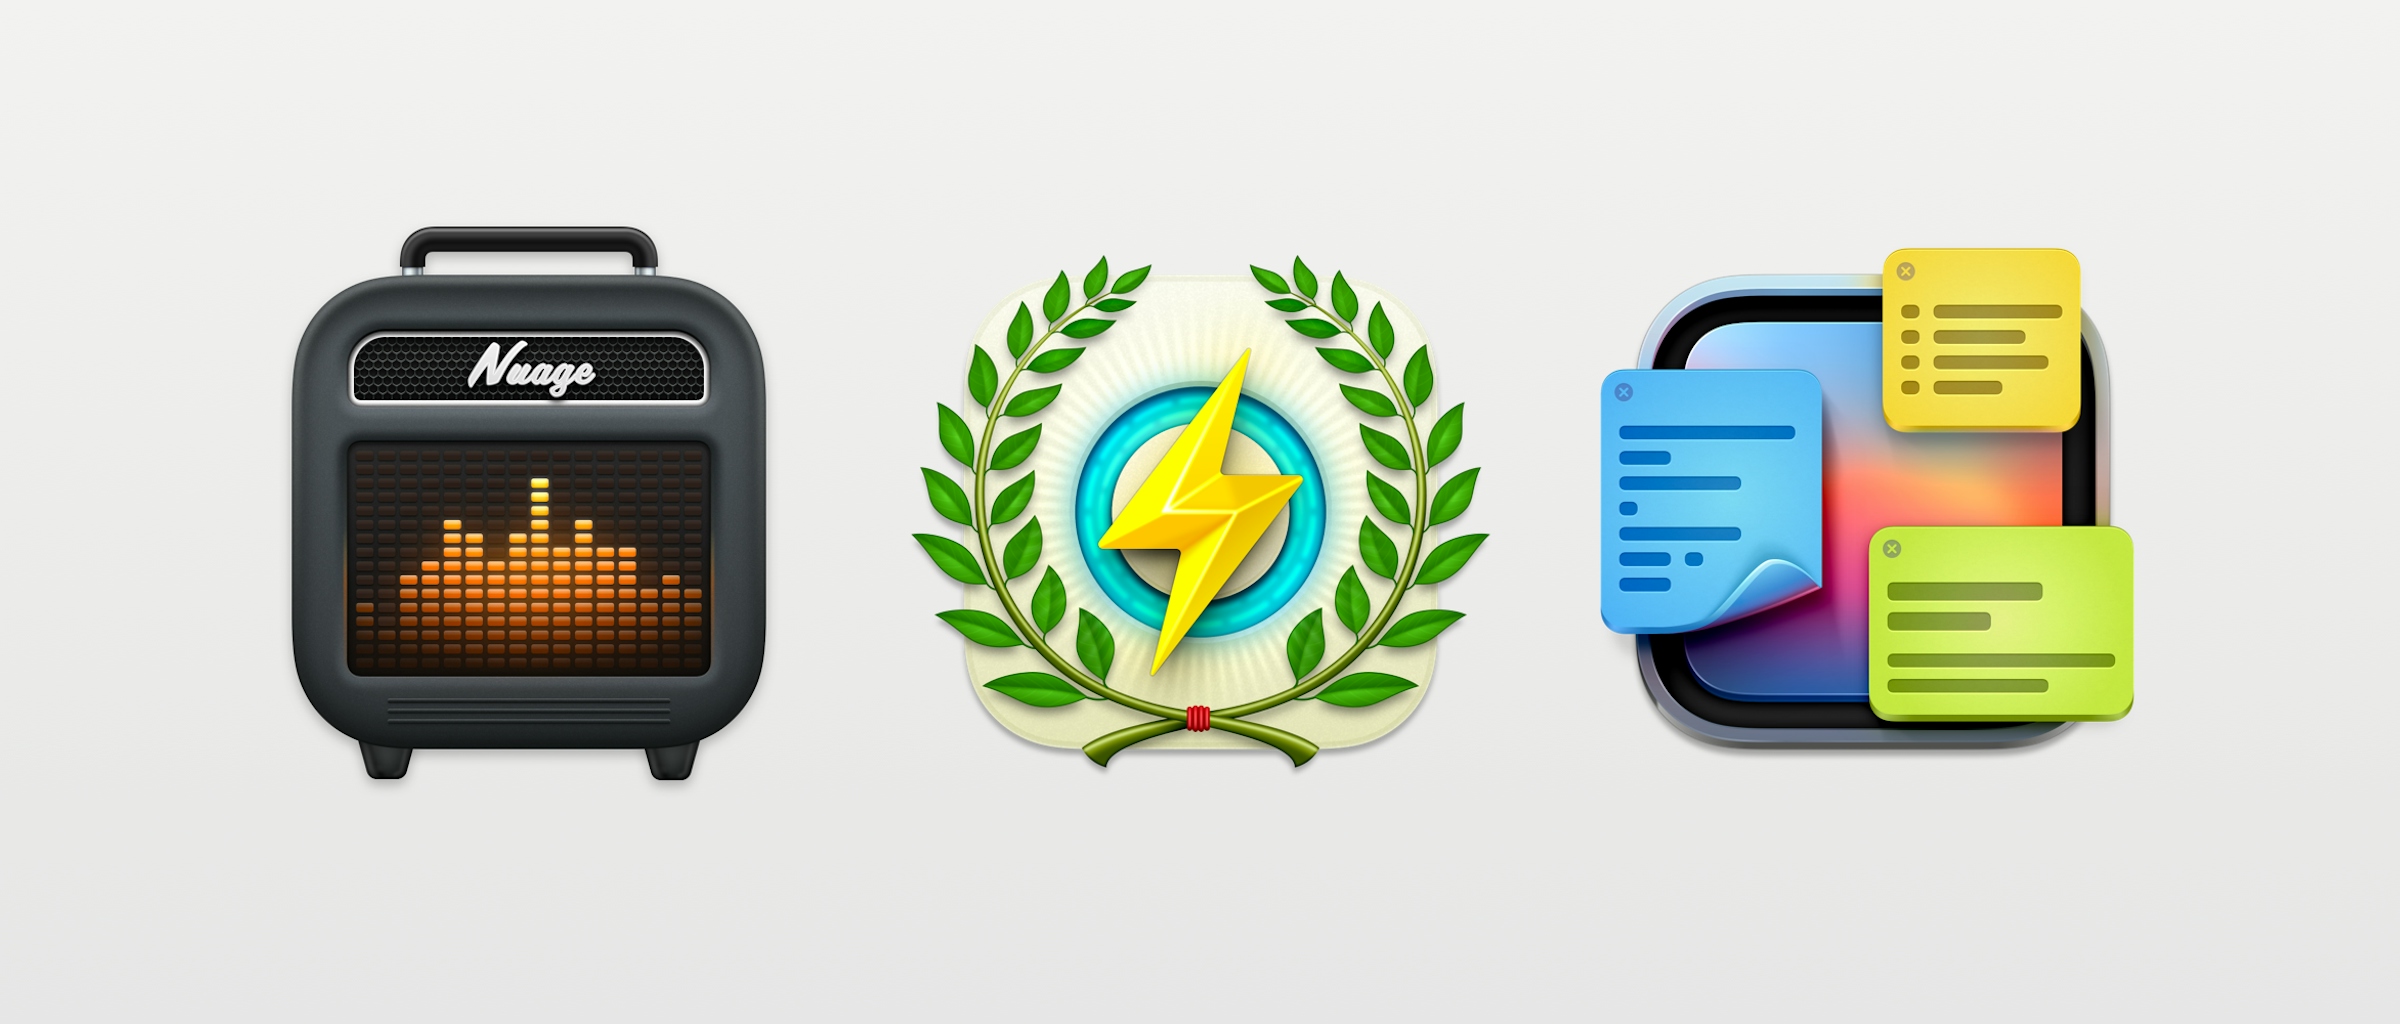 Header image featuring three icons designed by Yannick Lung.